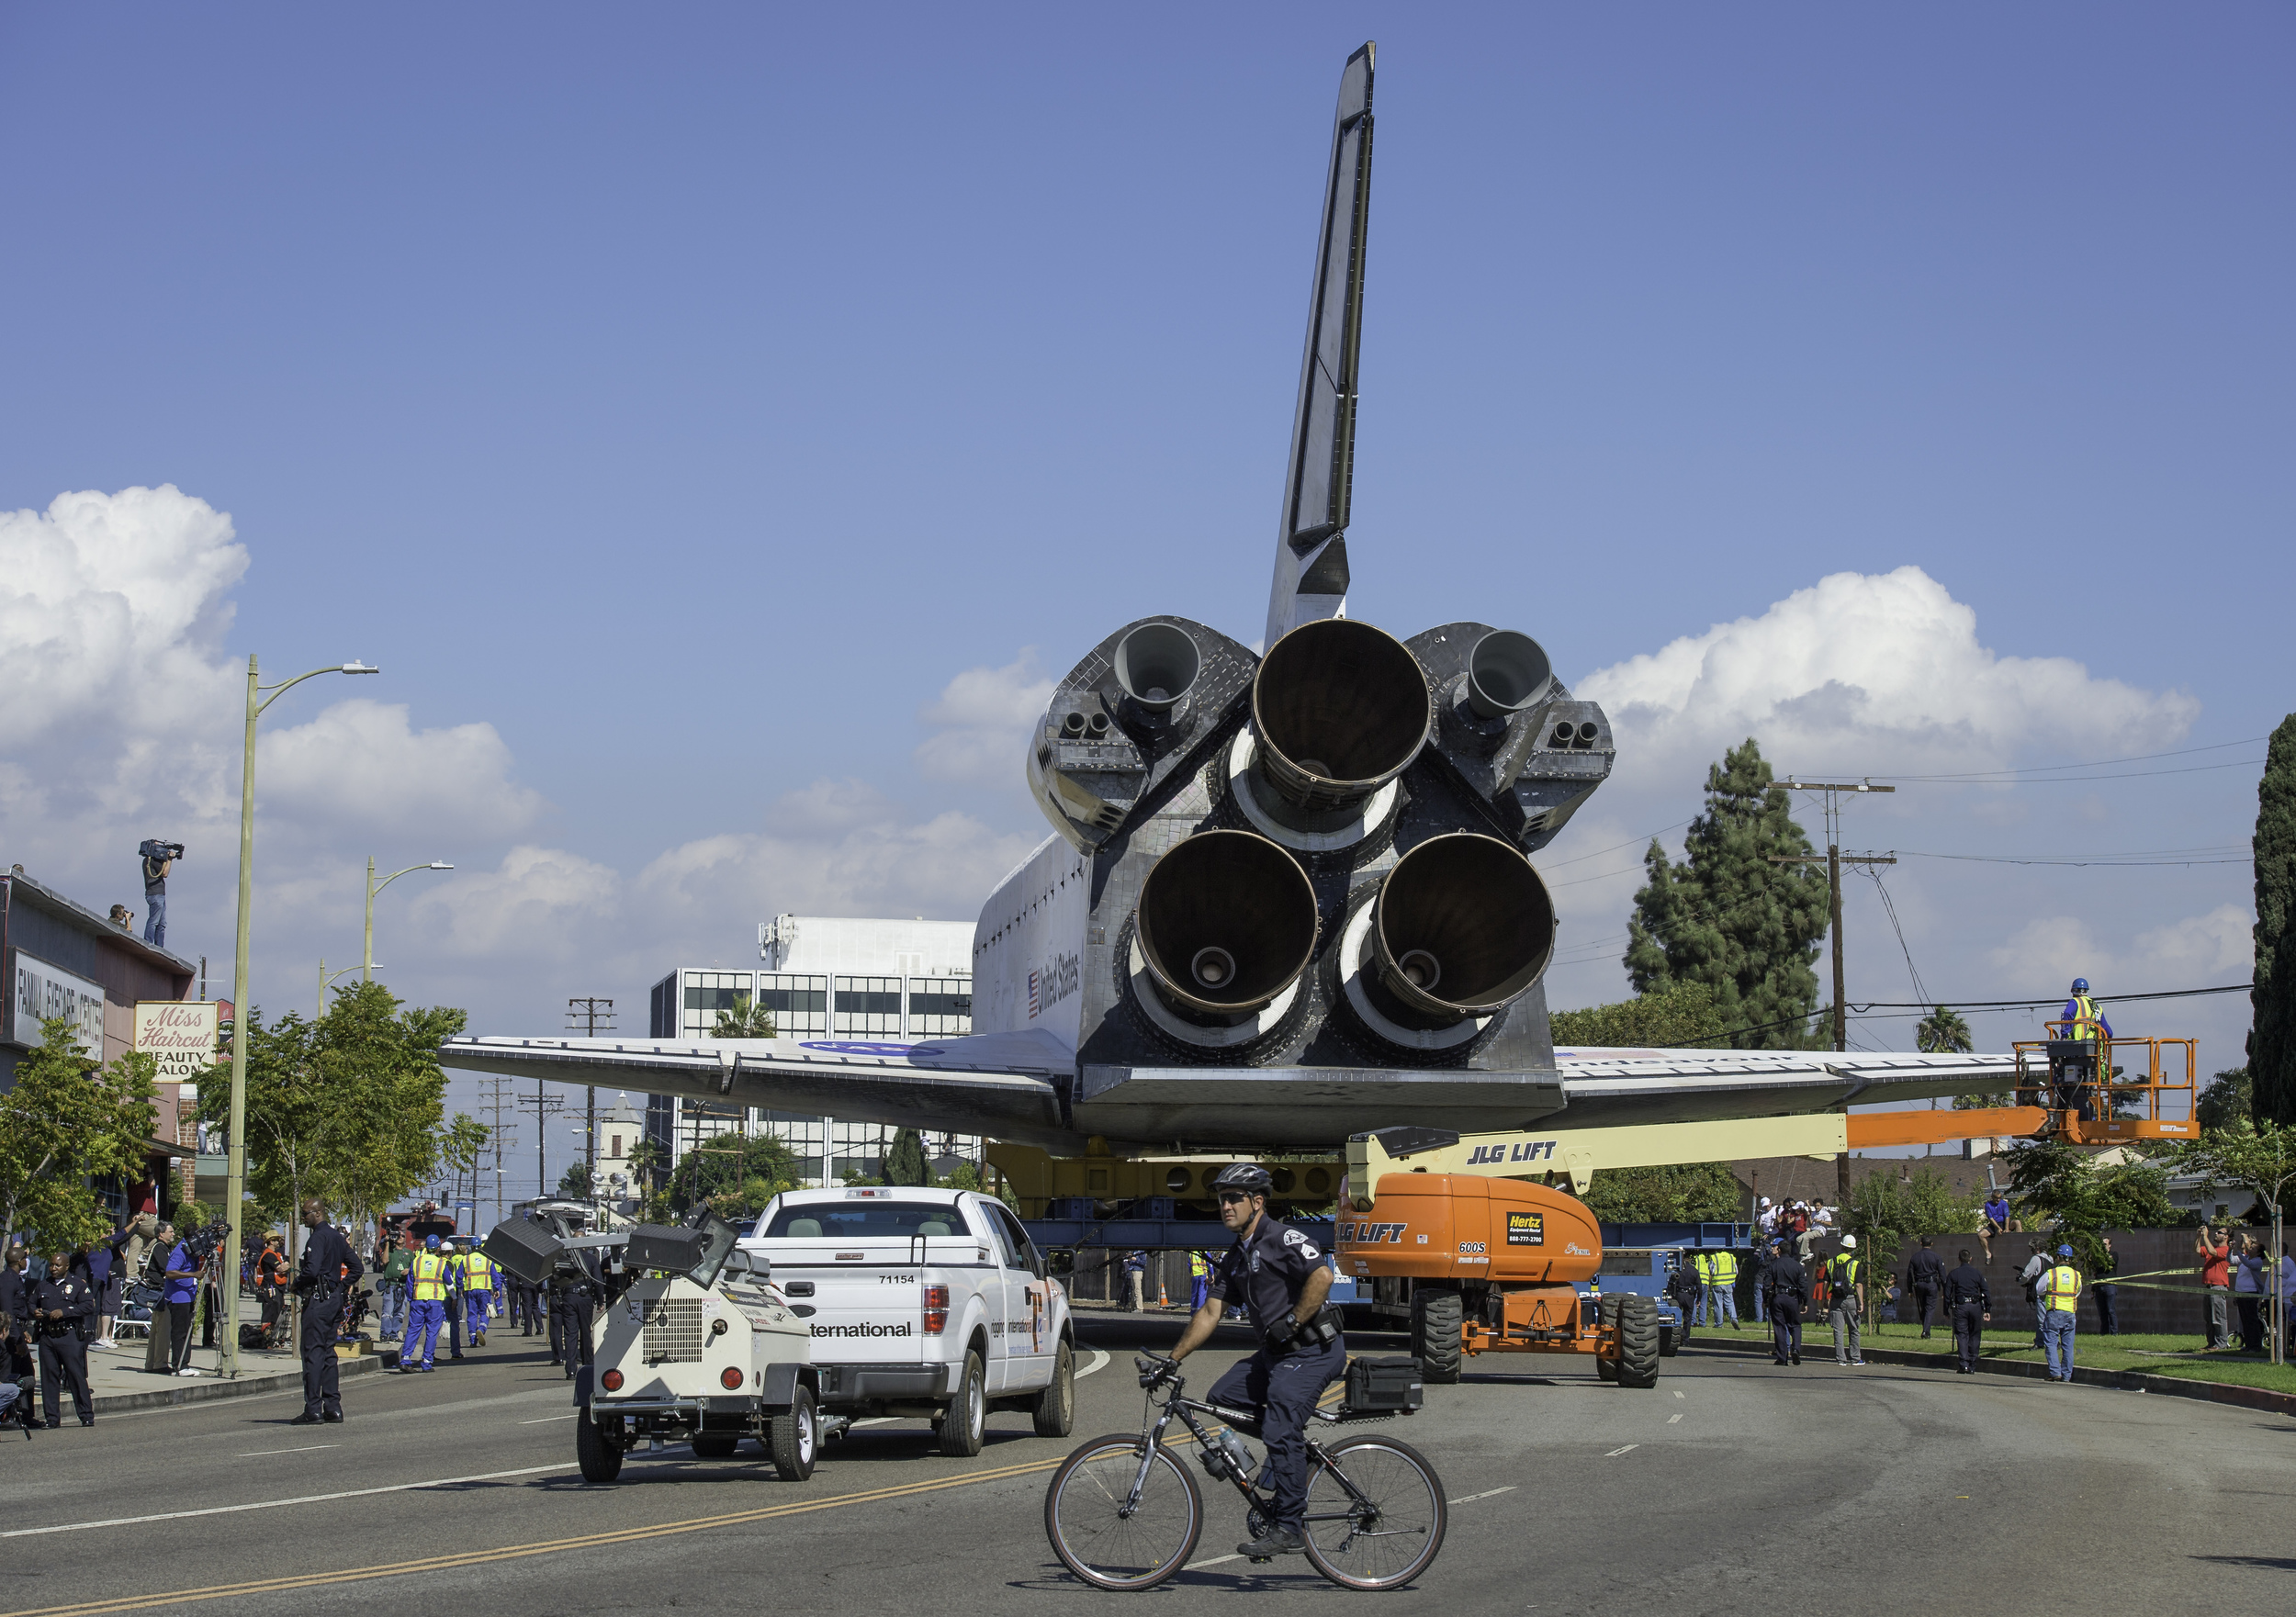  Space shuttle Endeavour is seen as it makes its way to its new home at the California Science Center in Los Angeles, Friday, Oct. 12, 2012. Endeavour, built as a replacement for space shuttle Challenger, completed 25 missions, spent 299 days in orbi